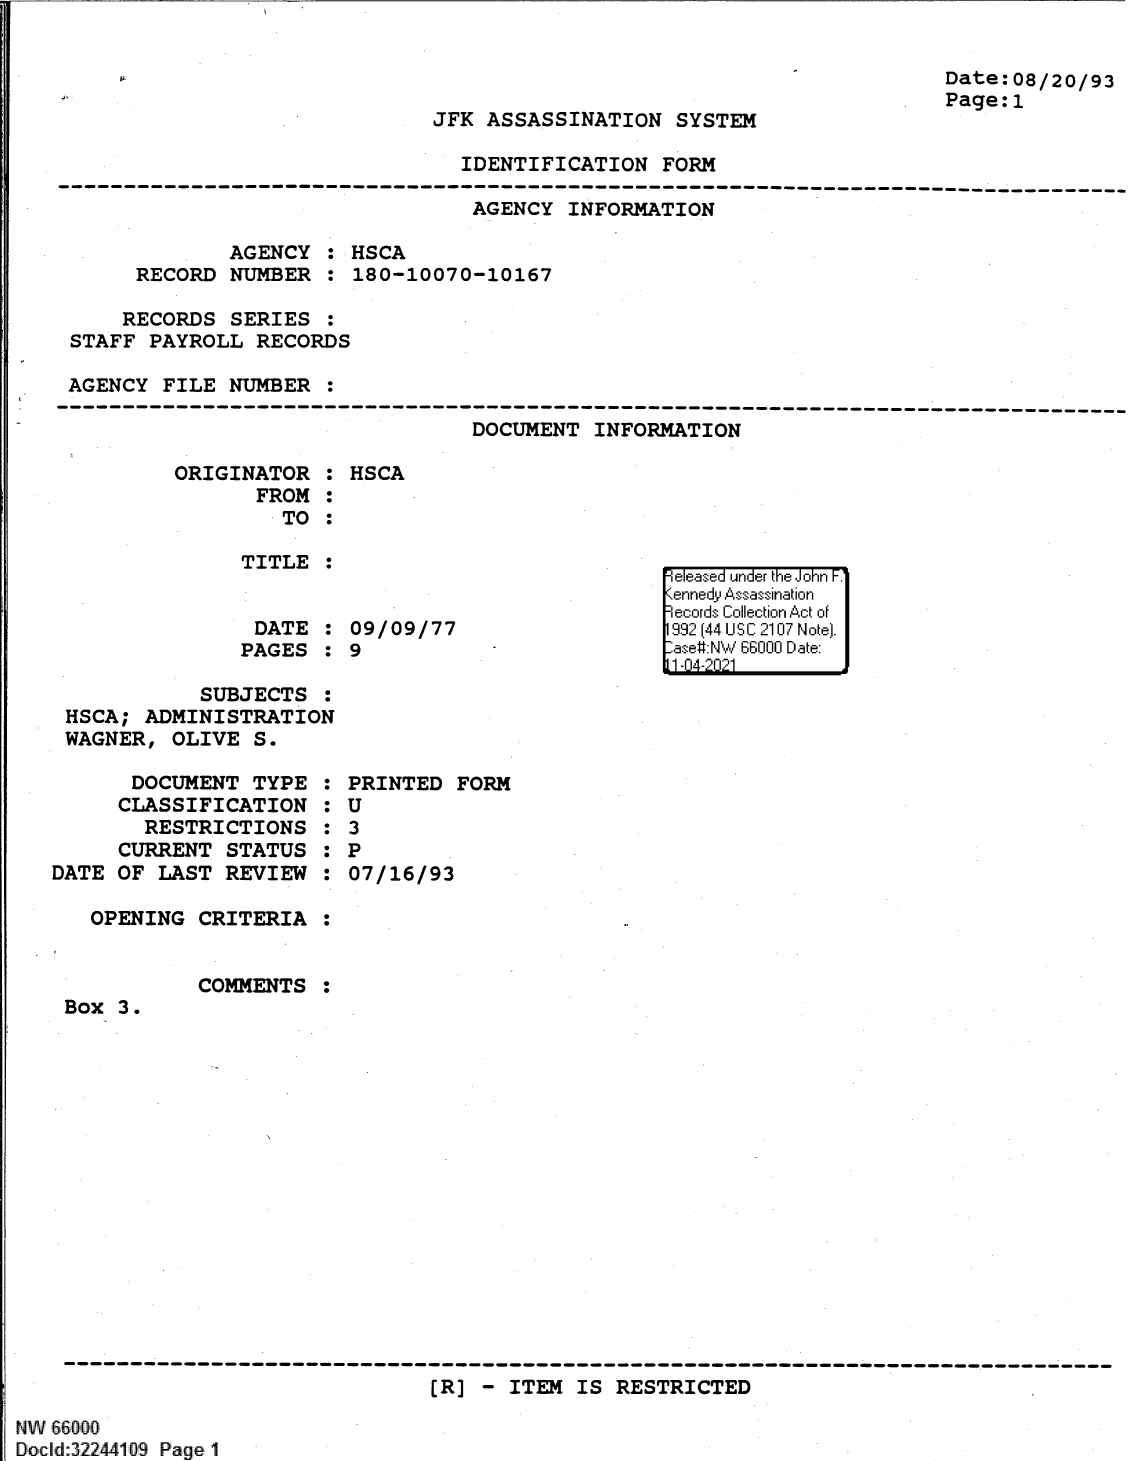 handle is hein.jfk/jfkarch61370 and id is 1 raw text is: JFK ASSASSINATION SYSTEM

Date:08/20/93
Page:1

IDENTIFICATION FORM

AGENCY INFORMATION
AGENCY : HSCA
RECORD NUMBER : 180-10070-10167
RECORDS SERIES :
STAFF PAYROLL RECORDS
AGENCY FILE NUMBER :
--------------------------------------------------------------------------------
DOCUMENT INFORMATION

ORIGINATOR :
FROM :
TO :
TITLE :
DATE :
PAGES :

HSCA
09/09/77
9

SUBJECTS :
HSCA; ADMINISTRATION
WAGNER, OLIVE S.

DOCUMENT TYPE
CLASSIFICATION
RESTRICTIONS
CURRENT STATUS
DATE OF LAST REVIEW
OPENING CRITERIA

Box 3.

COMMENTS

0
S
S
S
S
S
S
S
S
S
S
S

PRINTED FORM
U
3
P
07/16/93

:

----- ---- ----- ---- ---- ----- ---- ---- - -  a--  -  --  -  -  -   - - -  -------
(R] - ITEM IS RESTRICTED
NW 66000
Docld:32244109 Page 1

eIiease' under th John F.
-'r ir d'y Ass~assination
9ecordi C ollection Act ofi
19144 U S C;II 210117 N** otel.
-ase  NW 66000I1 D:ate:
11-04-2021i


